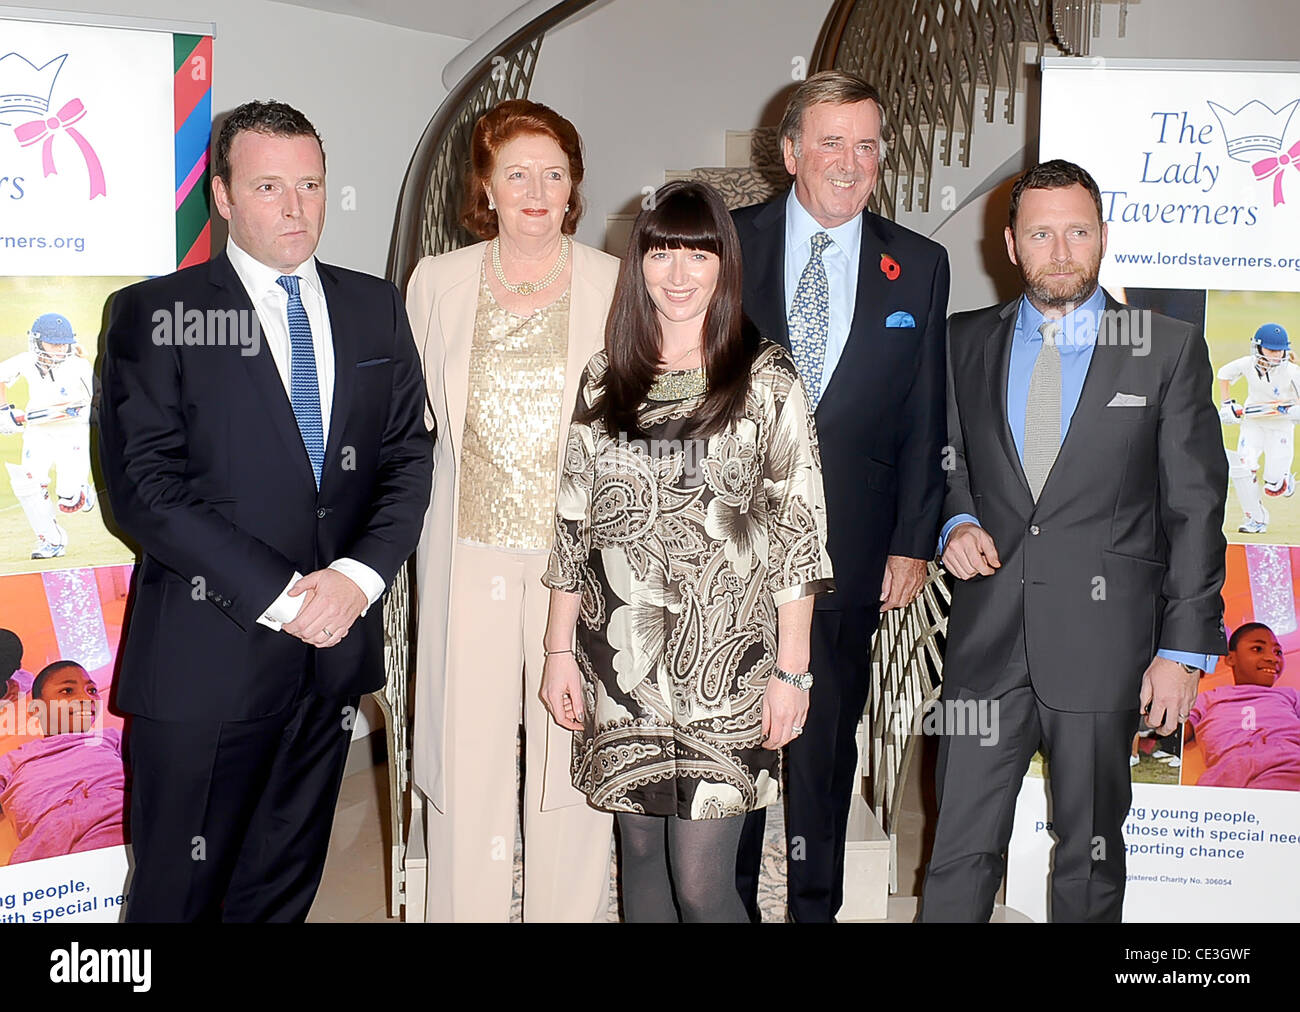 Sir Terry Wogan and his wife Lady Helen Wogan with their sons Alan (L) and Mark (R) and daughter Kathertine (C)  Sir Terry Wogan attends a tribute lunch in his honour, held at the Dorchester Hotel London, England - 05.11.10 Stock Photo